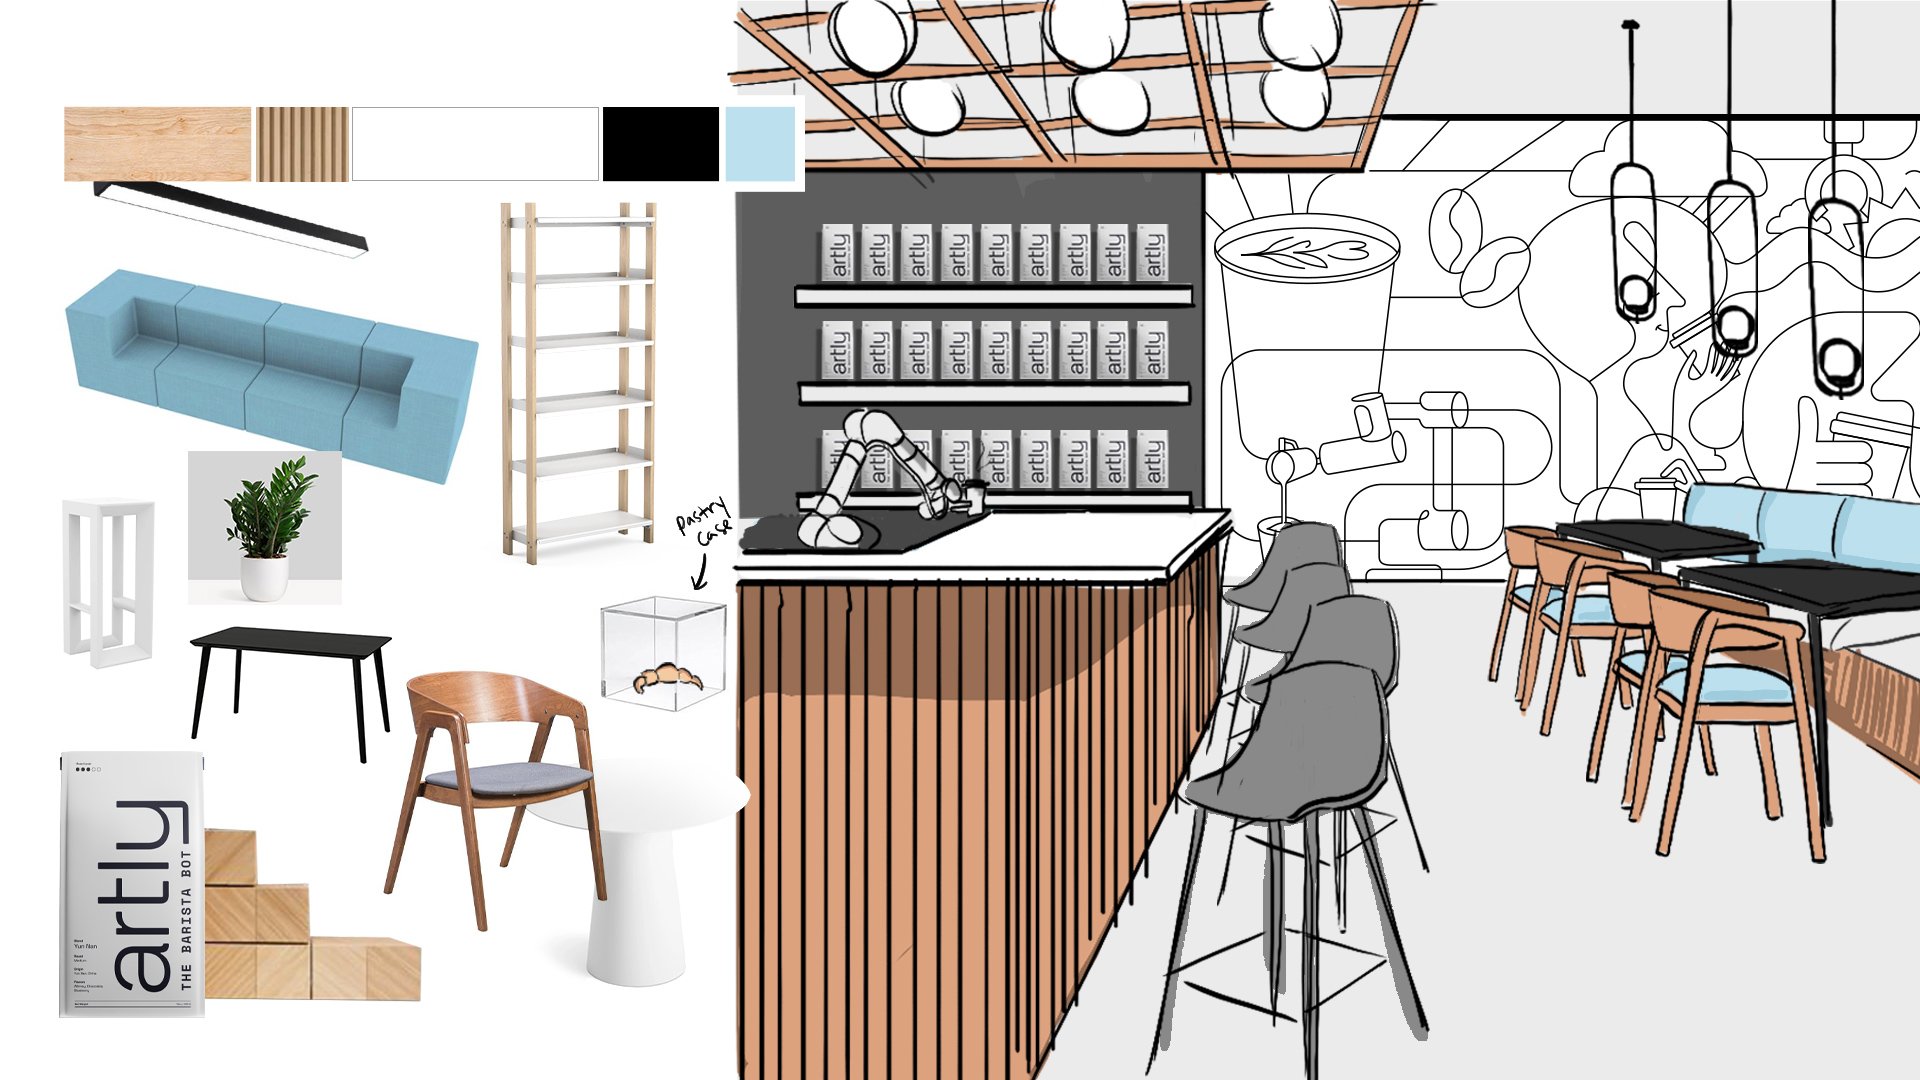 An illustration visualizes what an Artly retail space would look like compete with wood paneling on the bar, bar stools, and a powder blue couch with Artly illustrations adorning the walls.